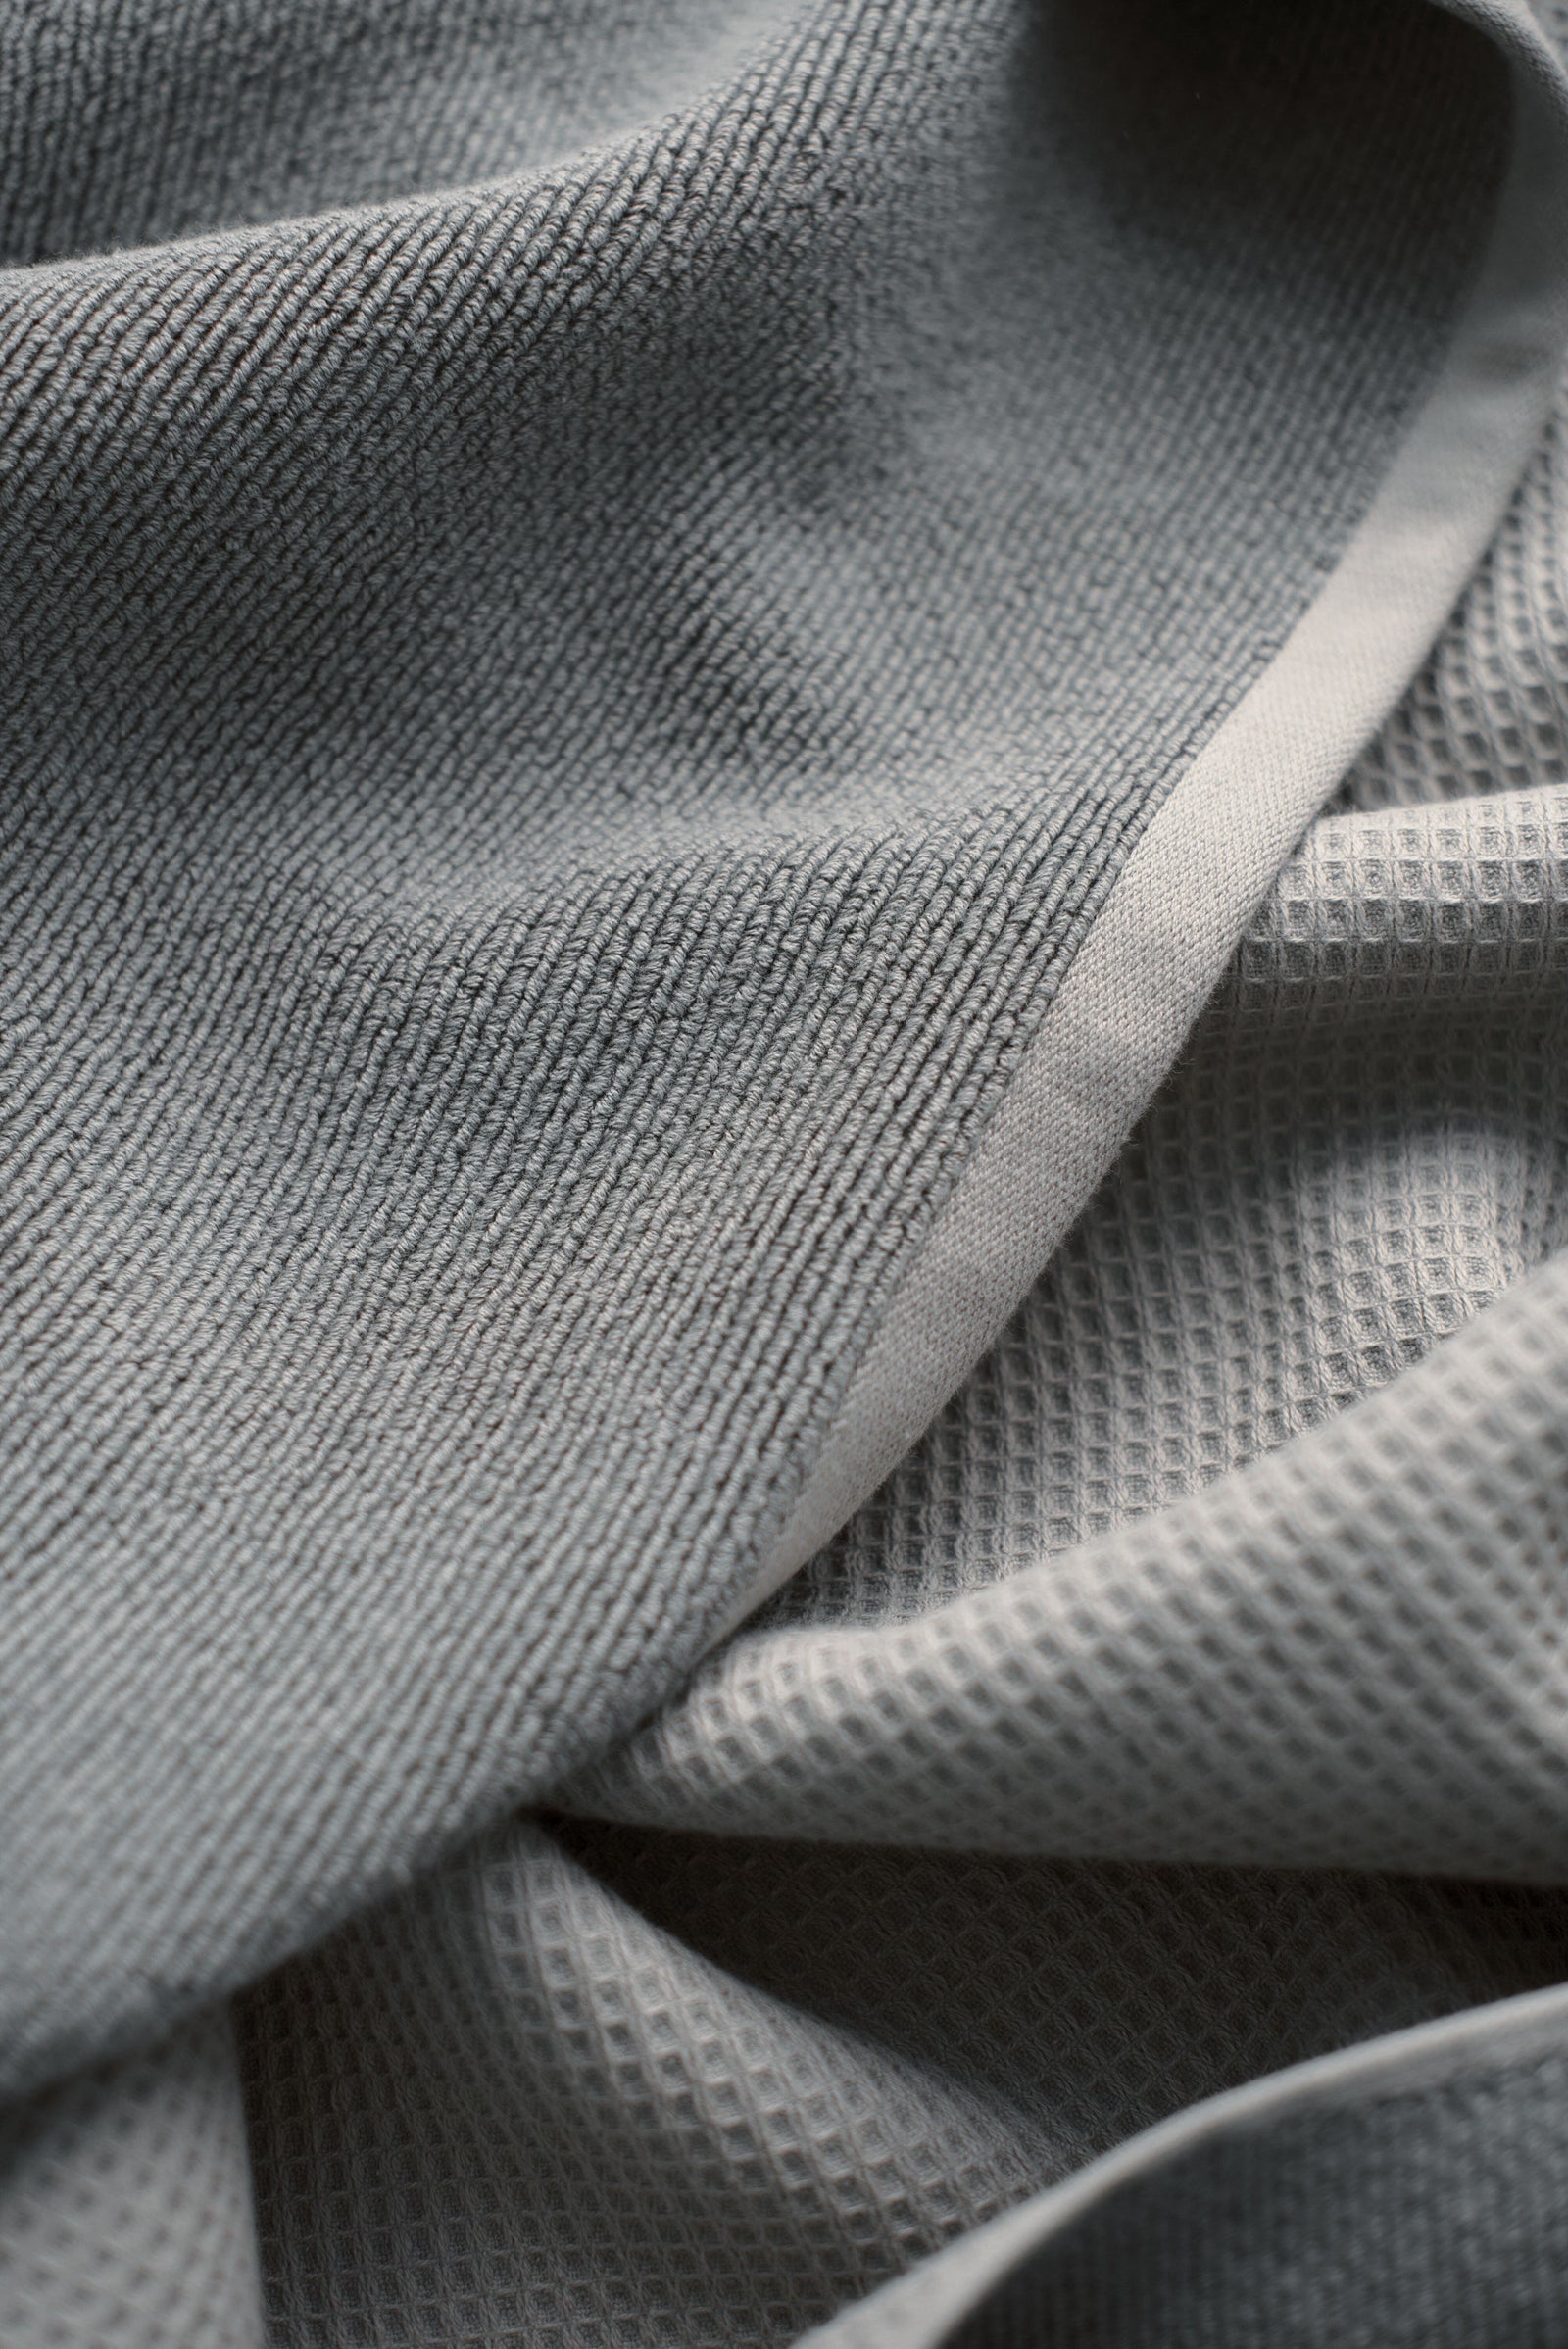 Waffle Bath Towel in the color Charcoal. Photo of Charcoal Waffle Bath Towel taken close up showing only the Charcoal. 